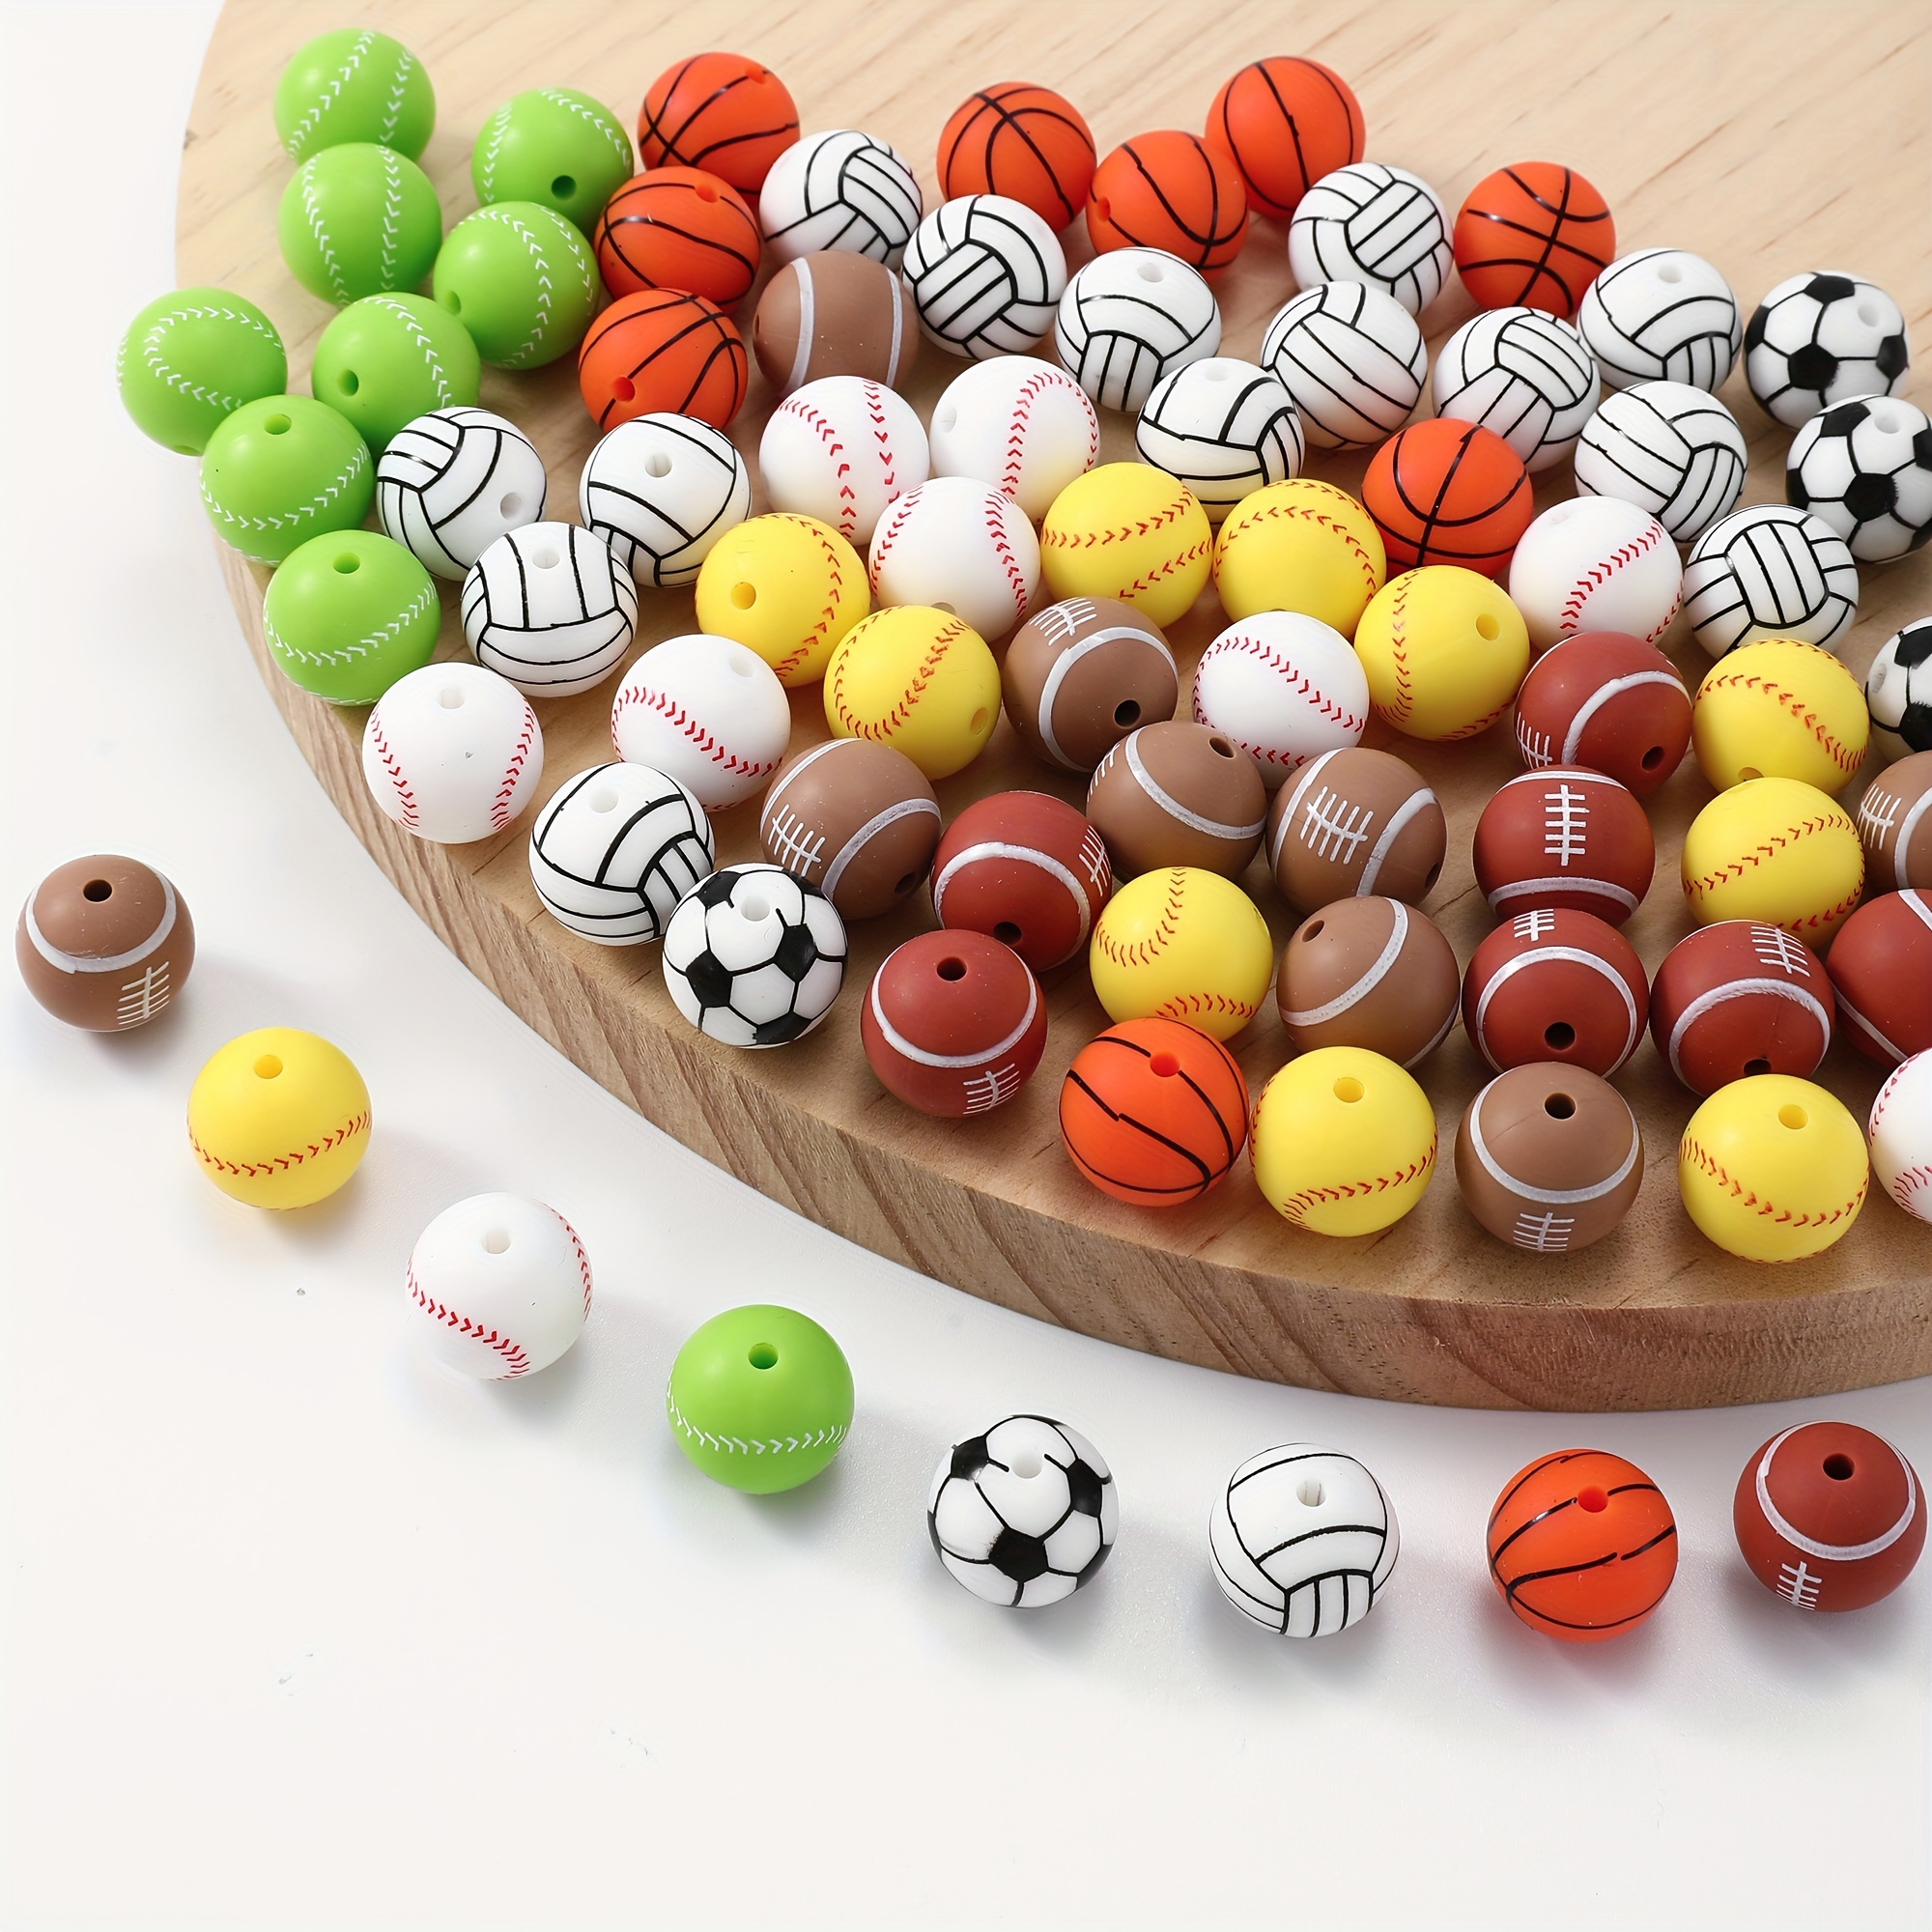 

40/30pcs Sports Theme Silicone Beads 15mm Oval Baseball Softball Football Basketball Volleyball Tennis Beads For Jewelry Making Diy Key Bag Phone Chain Bracelet Necklace Craft Supplies